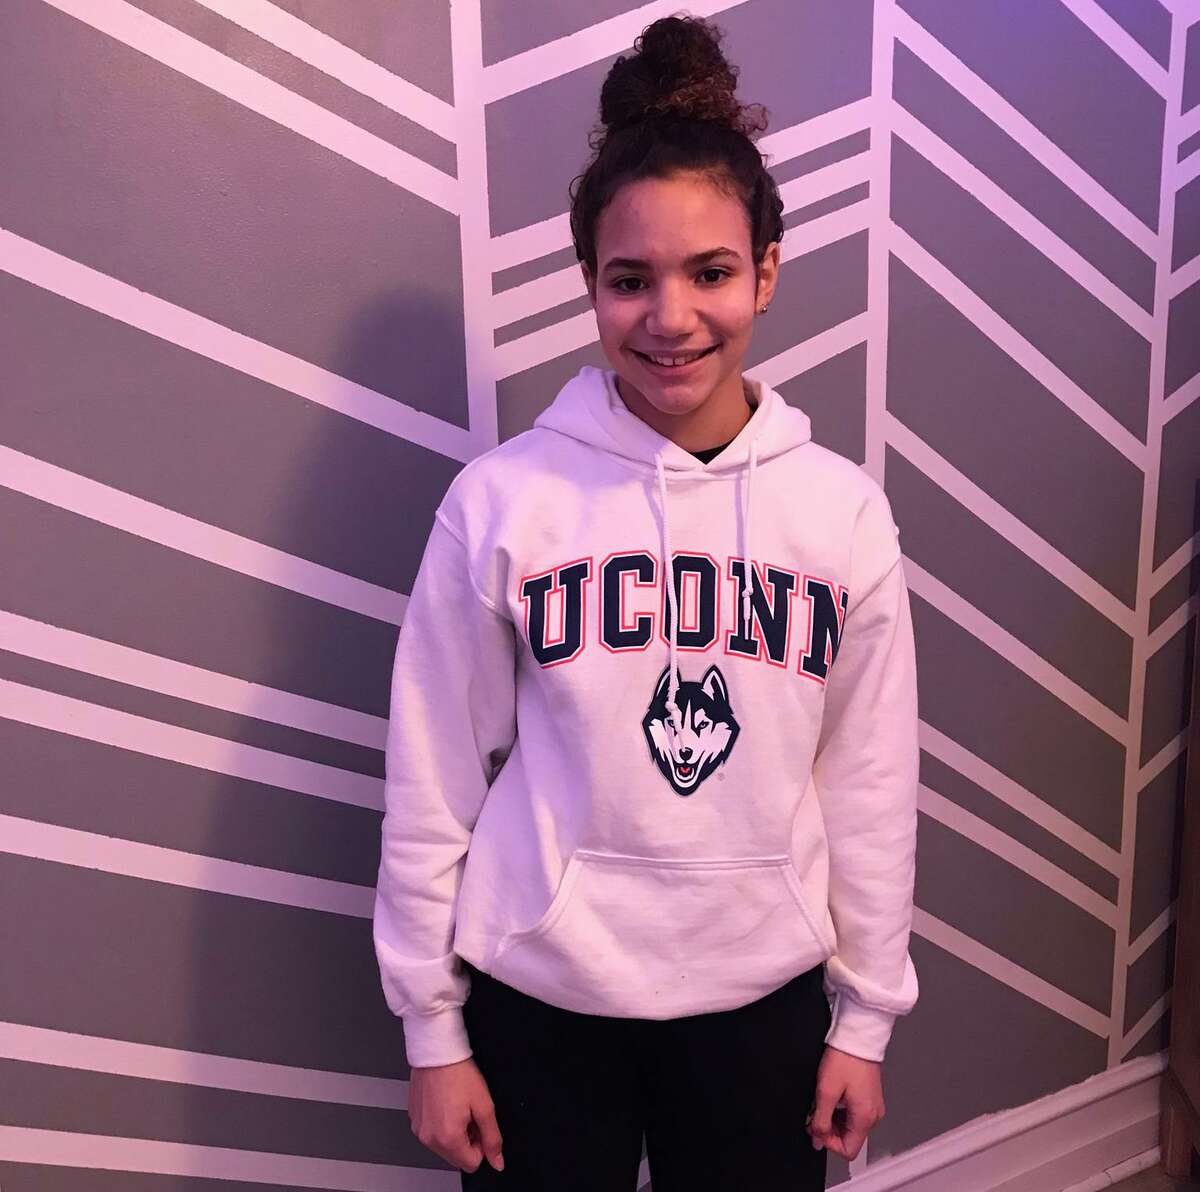 For Christmas, Alaina Sweet of Mechanicsburg, Pa., received her first piece of UConn apparel, a white sweatshirt, along with tickets to see her first women’s college basketball game when the Huskies play at Villanova on Jan. 5.